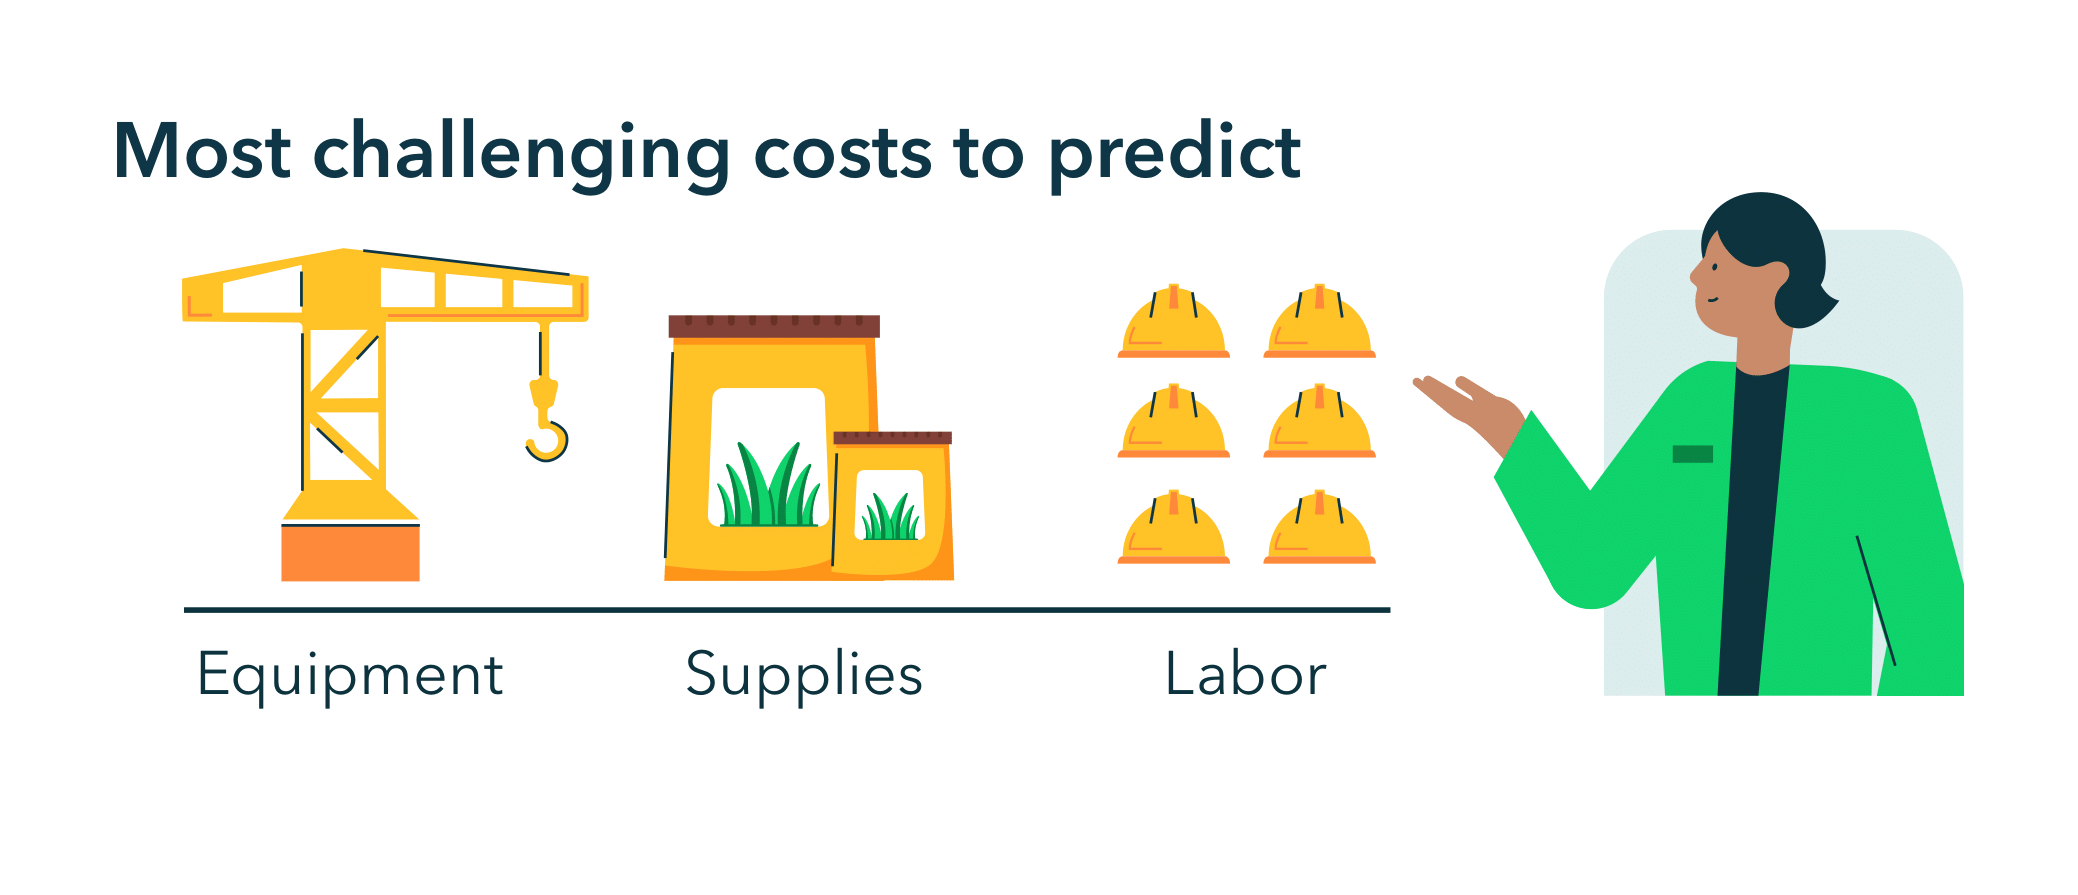 The most challenging costs to predict are equipment costs, cost of supplies, and labor costs.